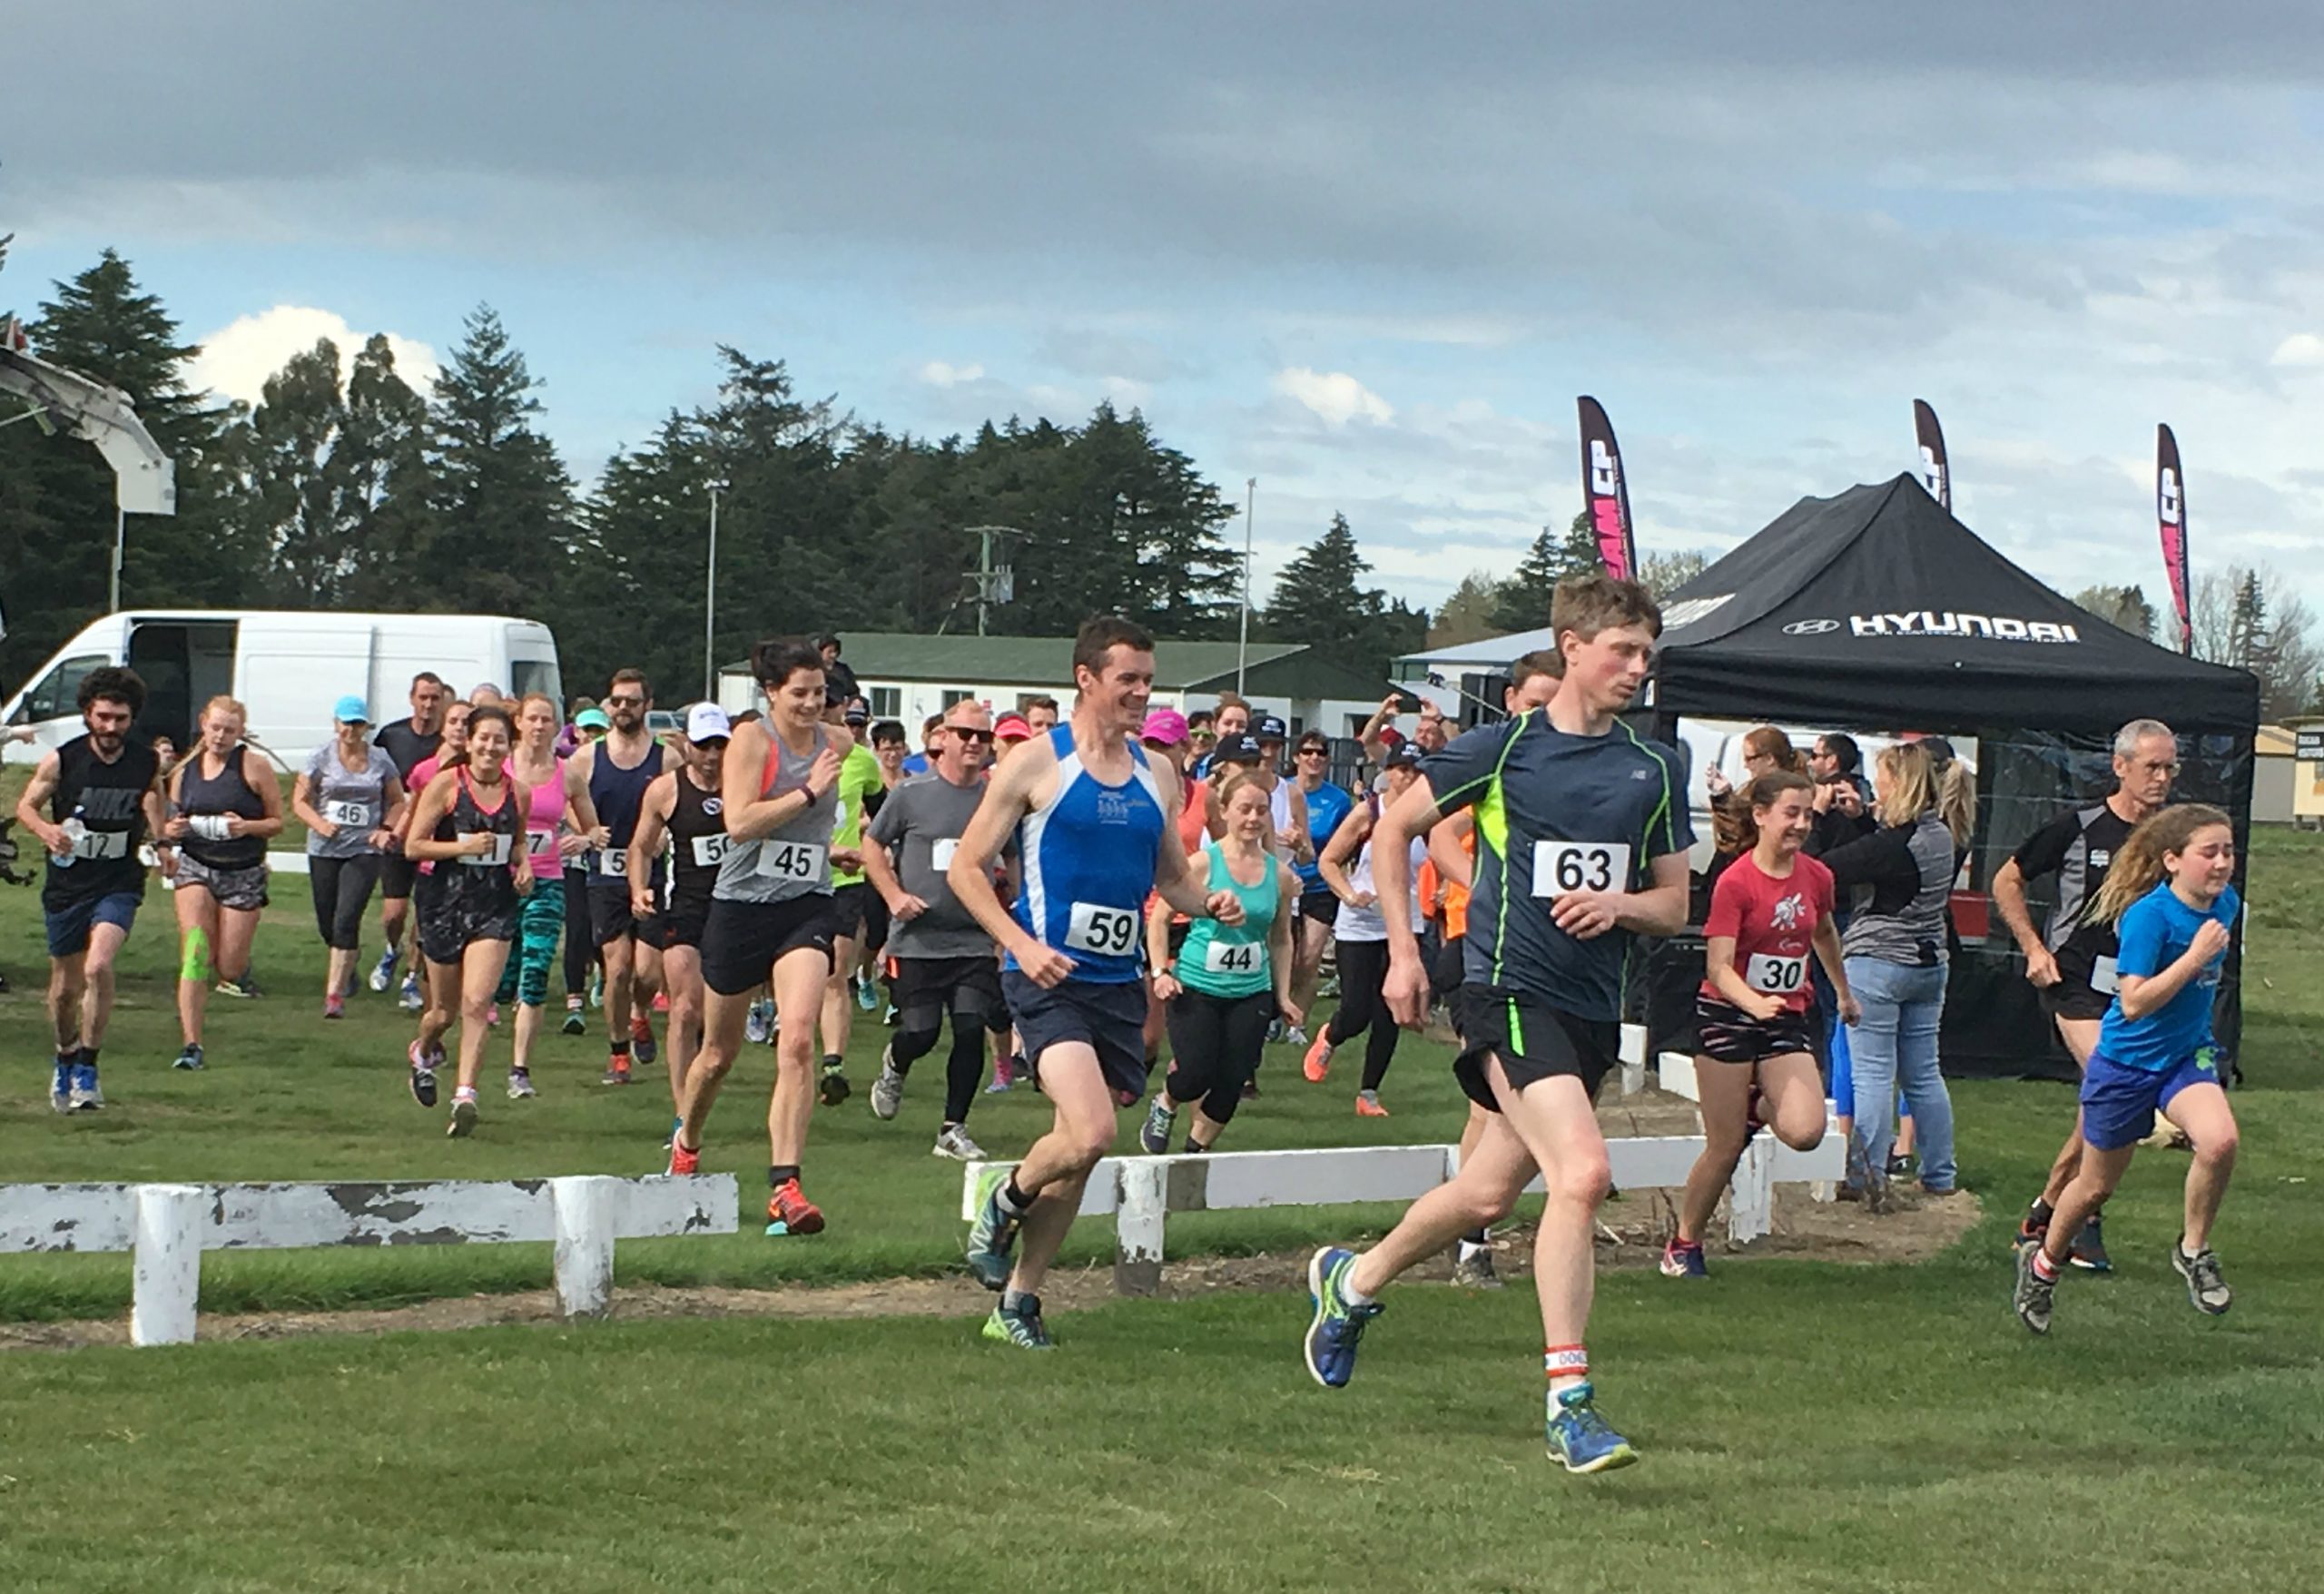 Competitors head off in a past edition of the Salmon Run. Photo: Supplied